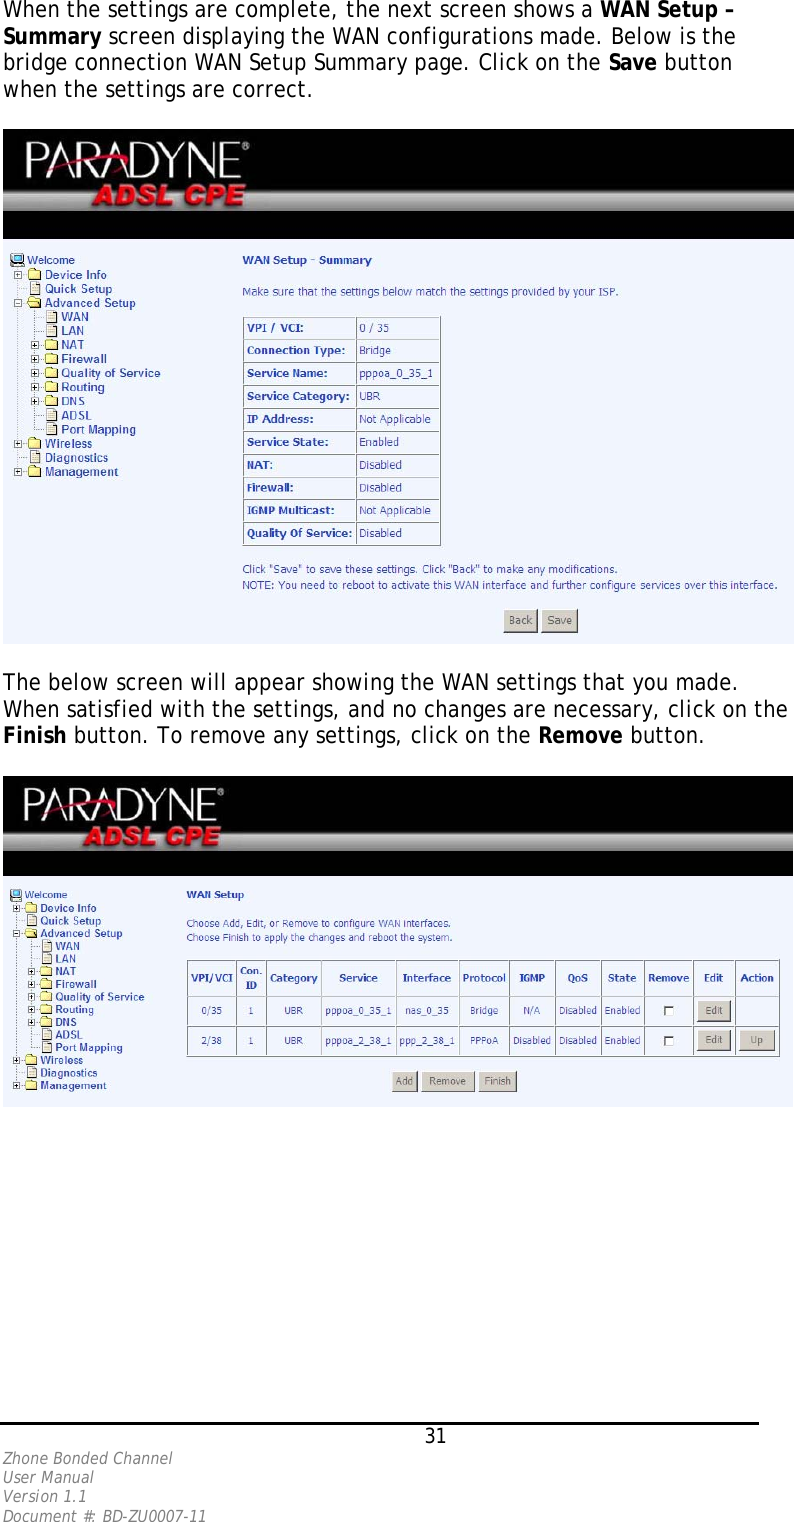 When the settings are complete, the next screen shows a WAN Setup – Summary screen displaying the WAN configurations made. Below is the bridge connection WAN Setup Summary page. Click on the Save button when the settings are correct.    The below screen will appear showing the WAN settings that you made. When satisfied with the settings, and no changes are necessary, click on the Finish button. To remove any settings, click on the Remove button.      31 Zhone Bonded Channel User Manual  Version 1.1 Document #: BD-ZU0007-11 